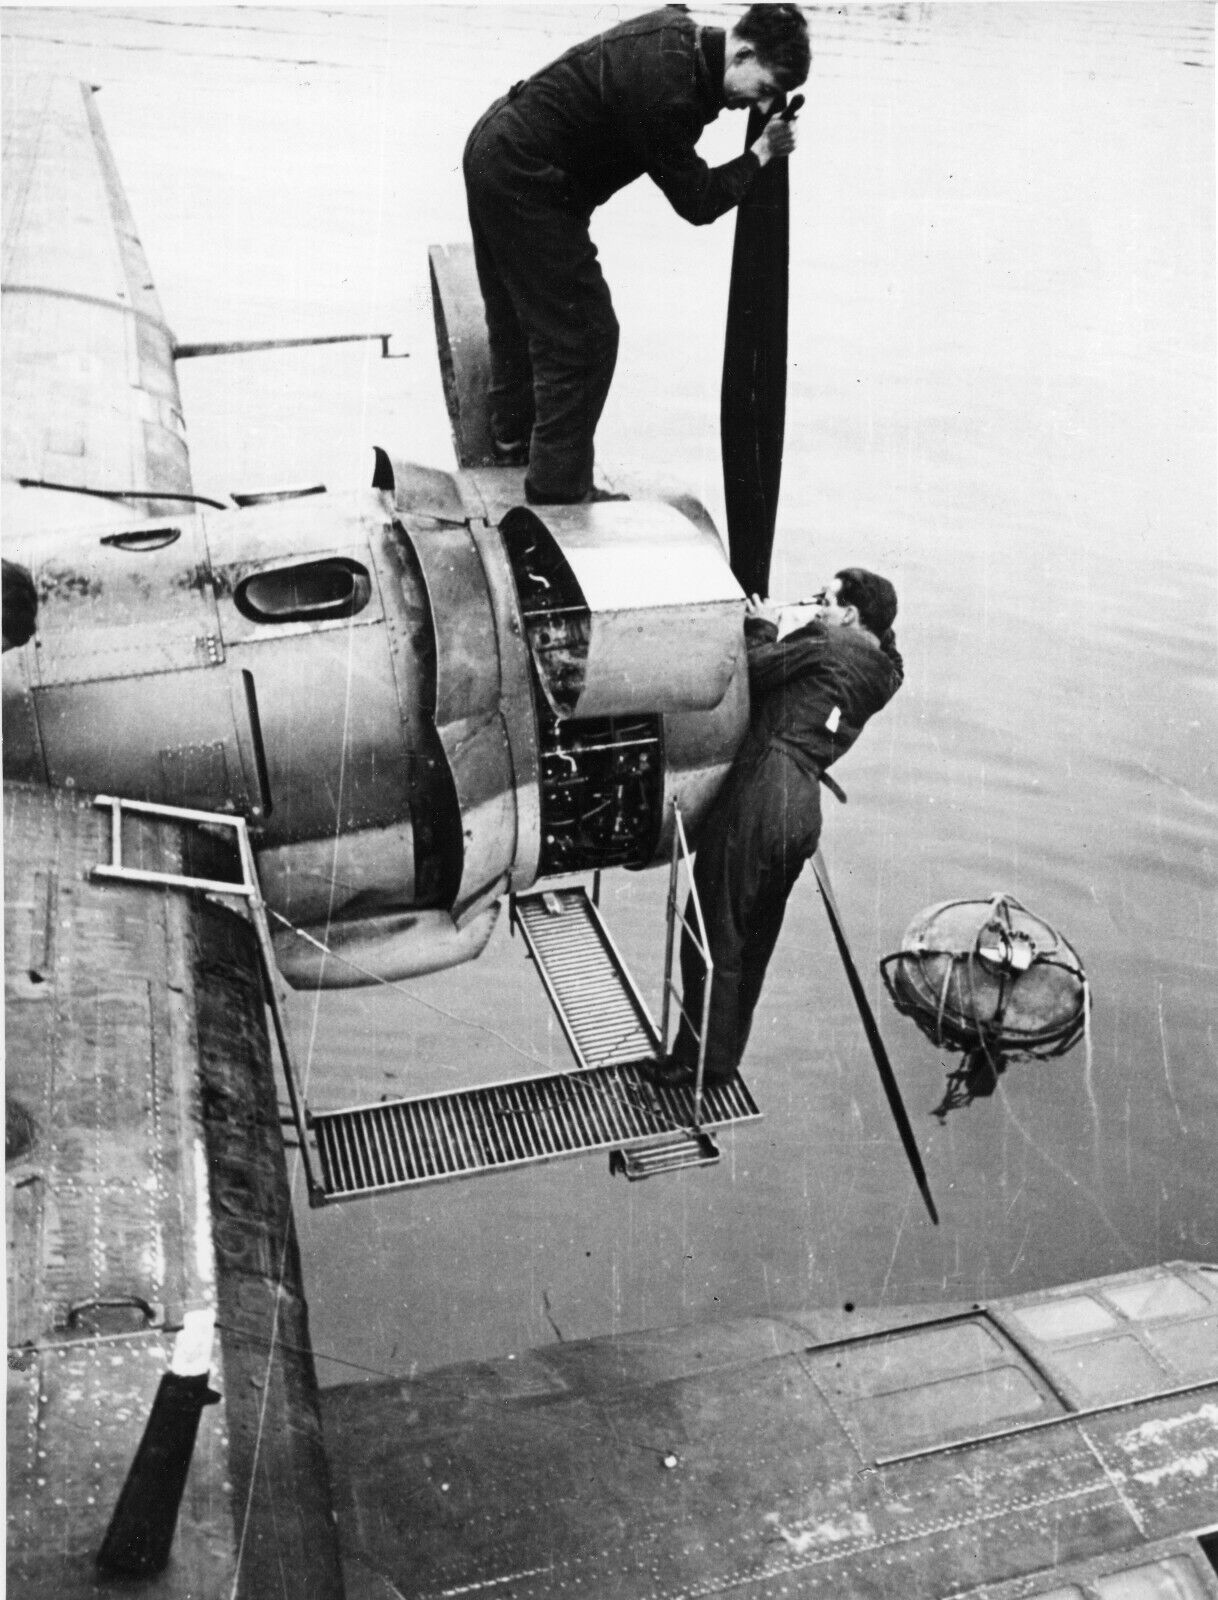 Catalina repairs 12 June 1943  - ex Bowyer Collection (964)